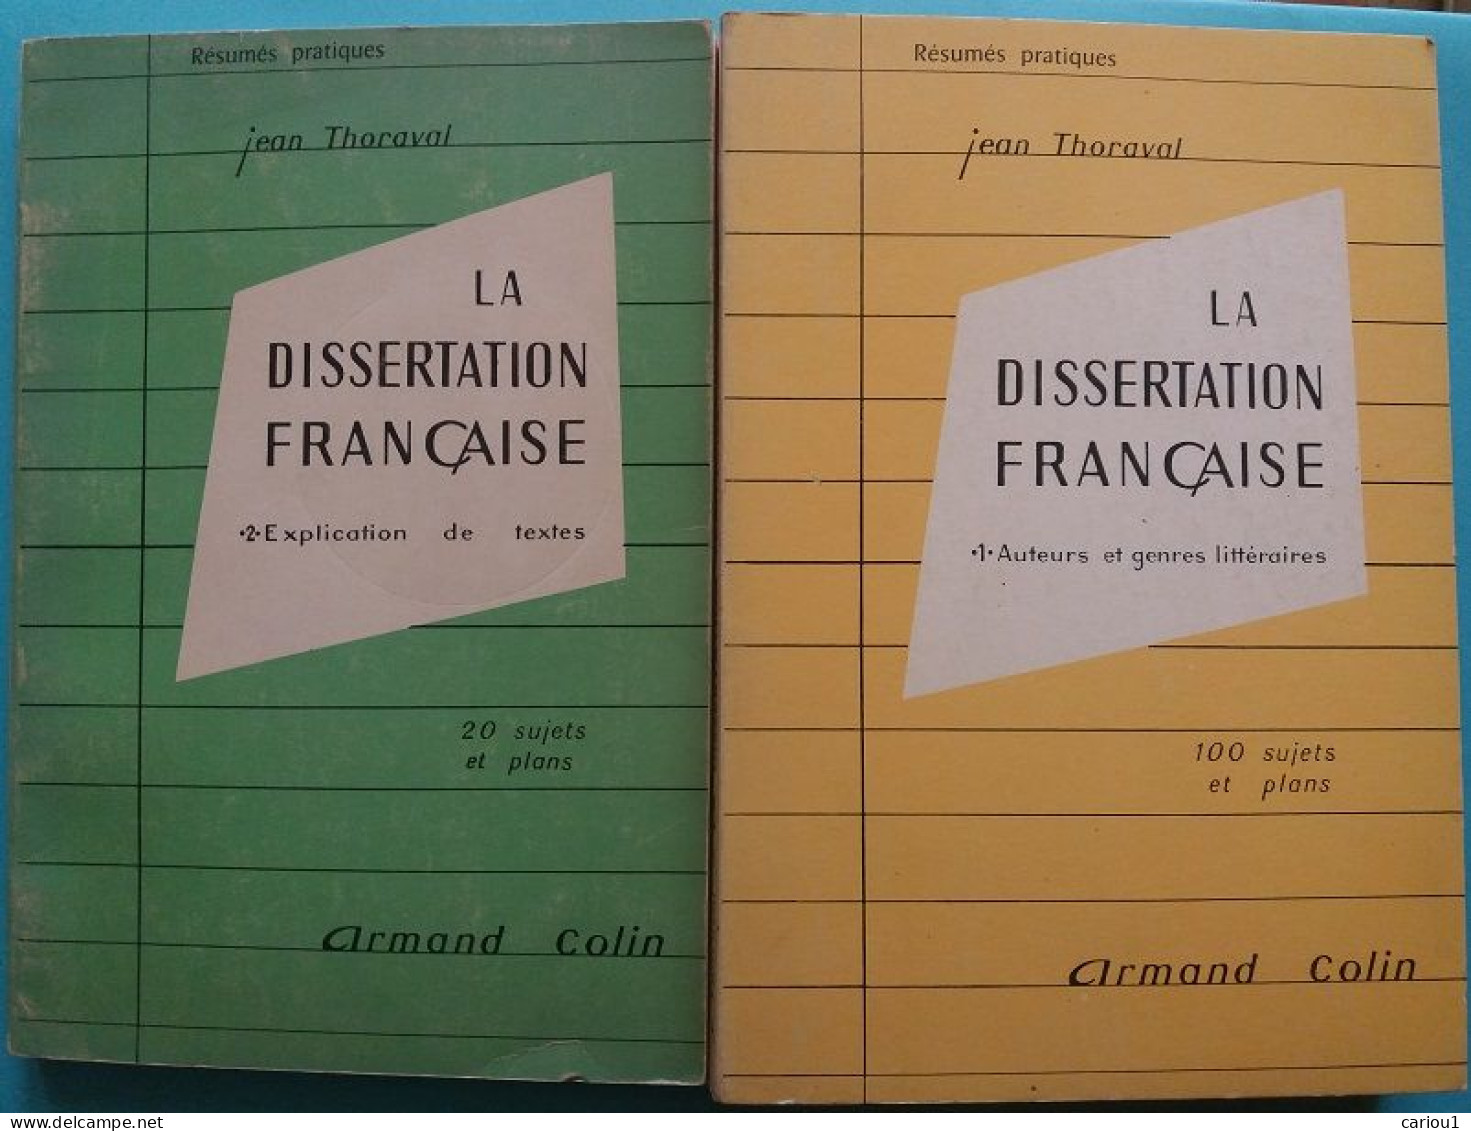 C1 Thoraval LA DISSERTATION FRANCAISE Complet 2 Tomes PORT INCLUS France - 12-18 Years Old